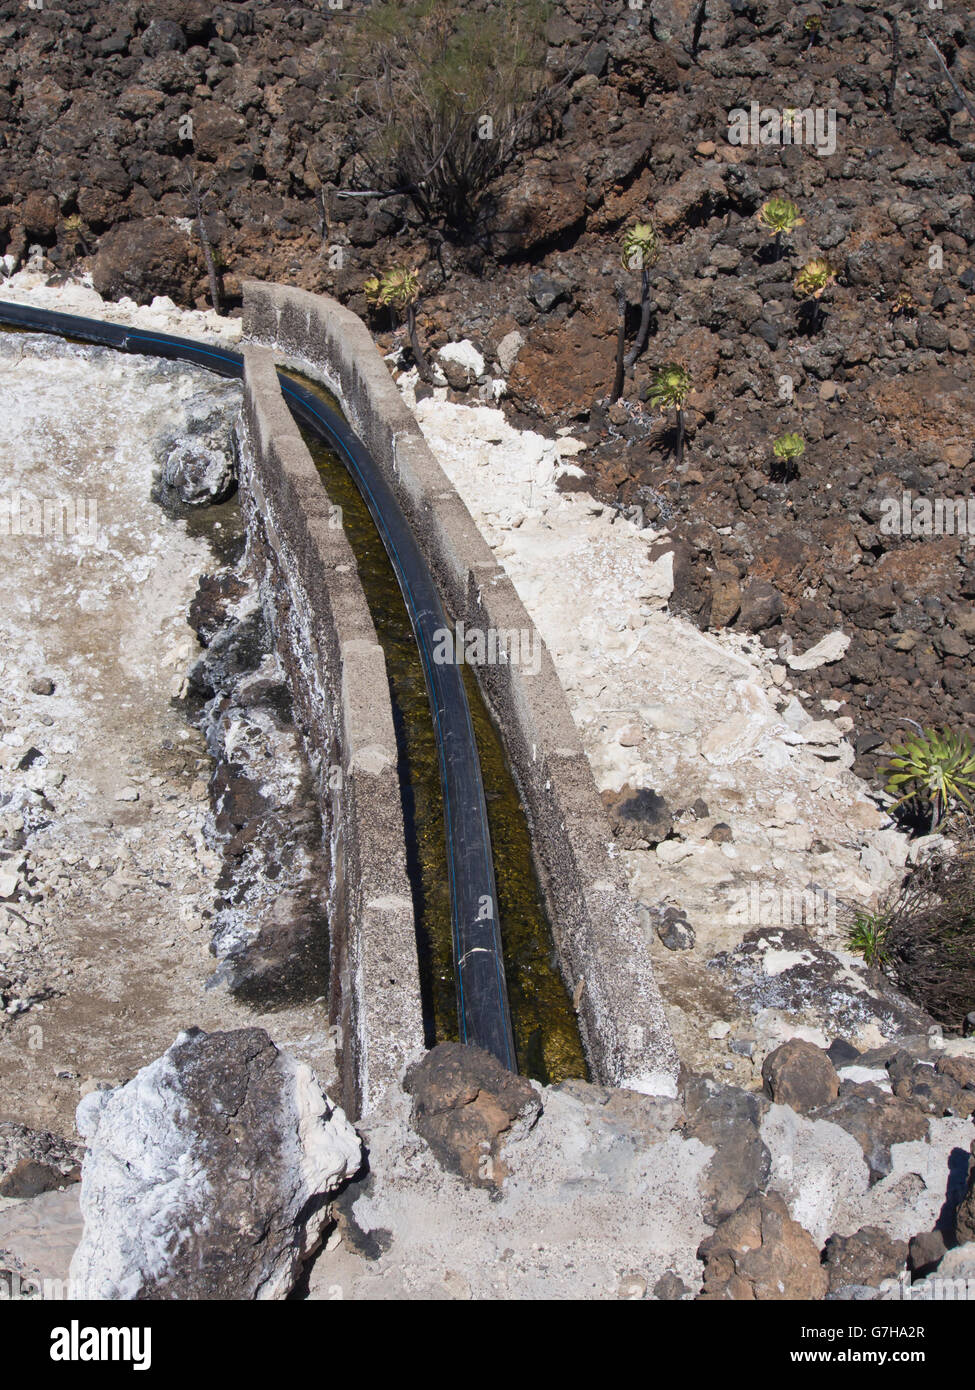 Tenerife Canary Islands Spain, open concrete water canal near Arguayo through lava fields carrying water to the fields Stock Photo